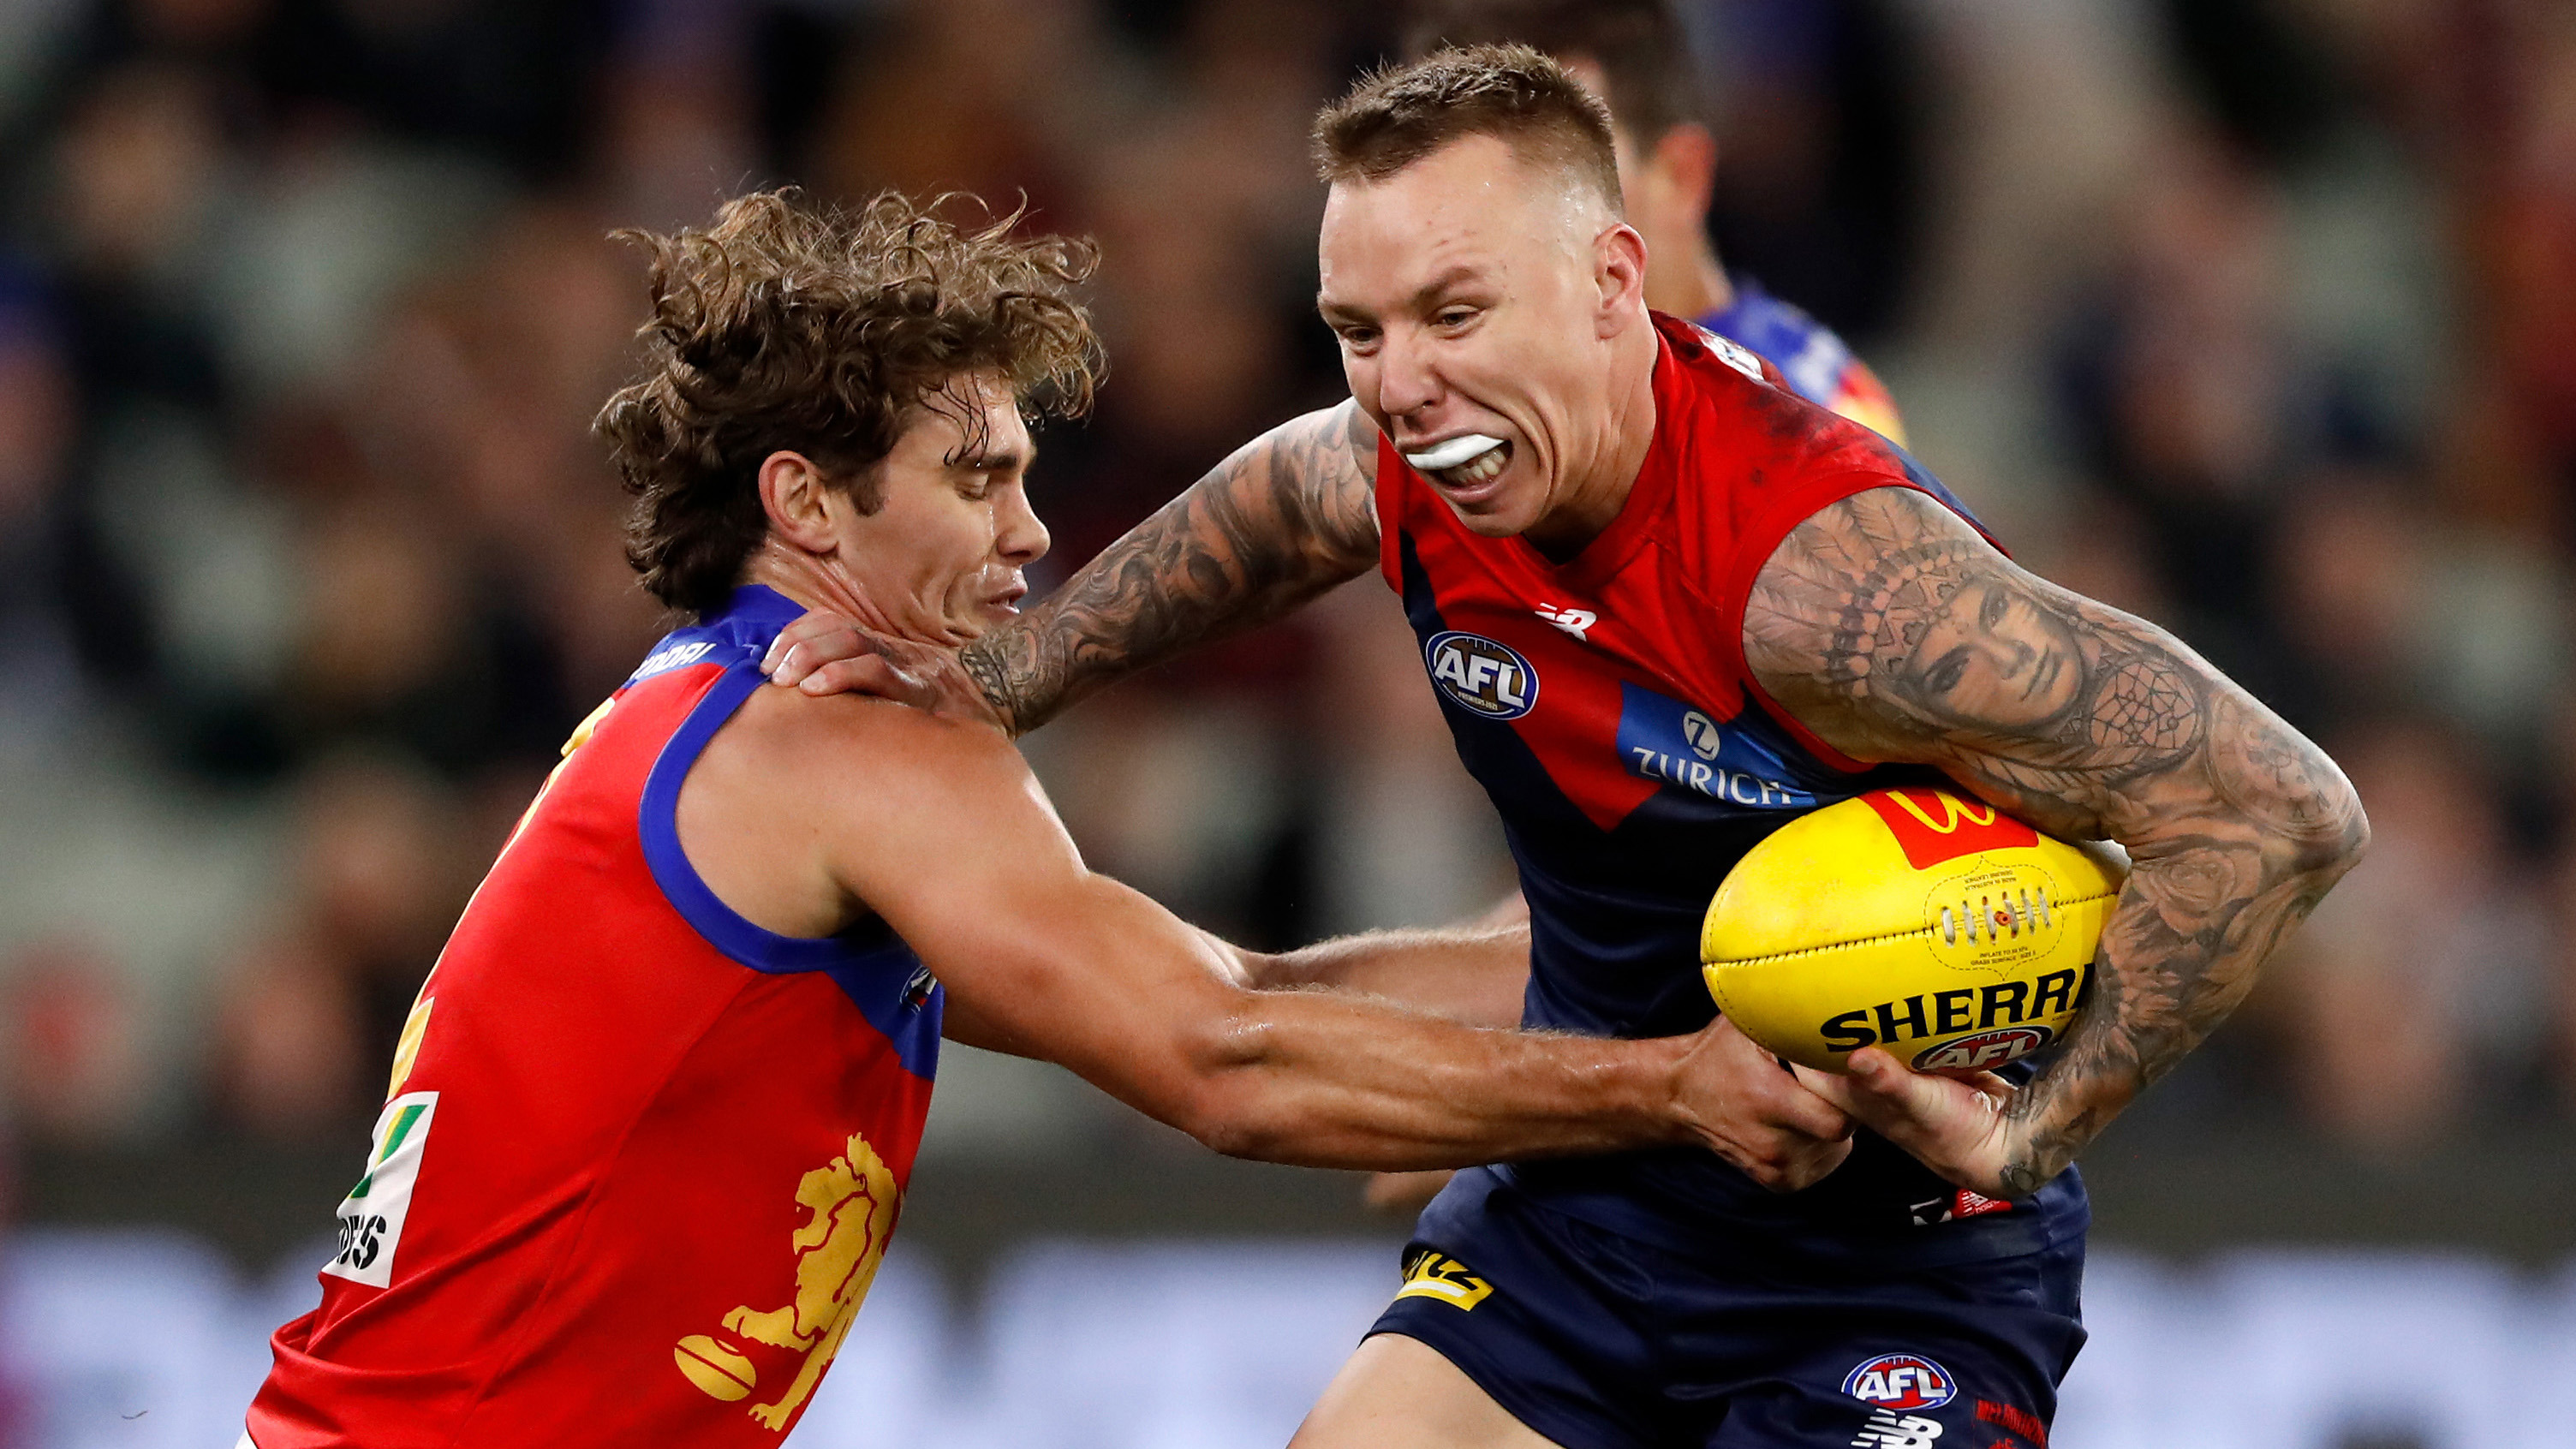 James Harmes of the Demons is tackled by Deven Robertson of the Lions during the 2022 AFL Round 15 match between the Melbourne Demons and the Brisbane Lions at the Melbourne Cricket Ground on June 23, 2022 in Melbourne, Australia. (Photo by Dylan Burns/AFL Photos via Getty Images)